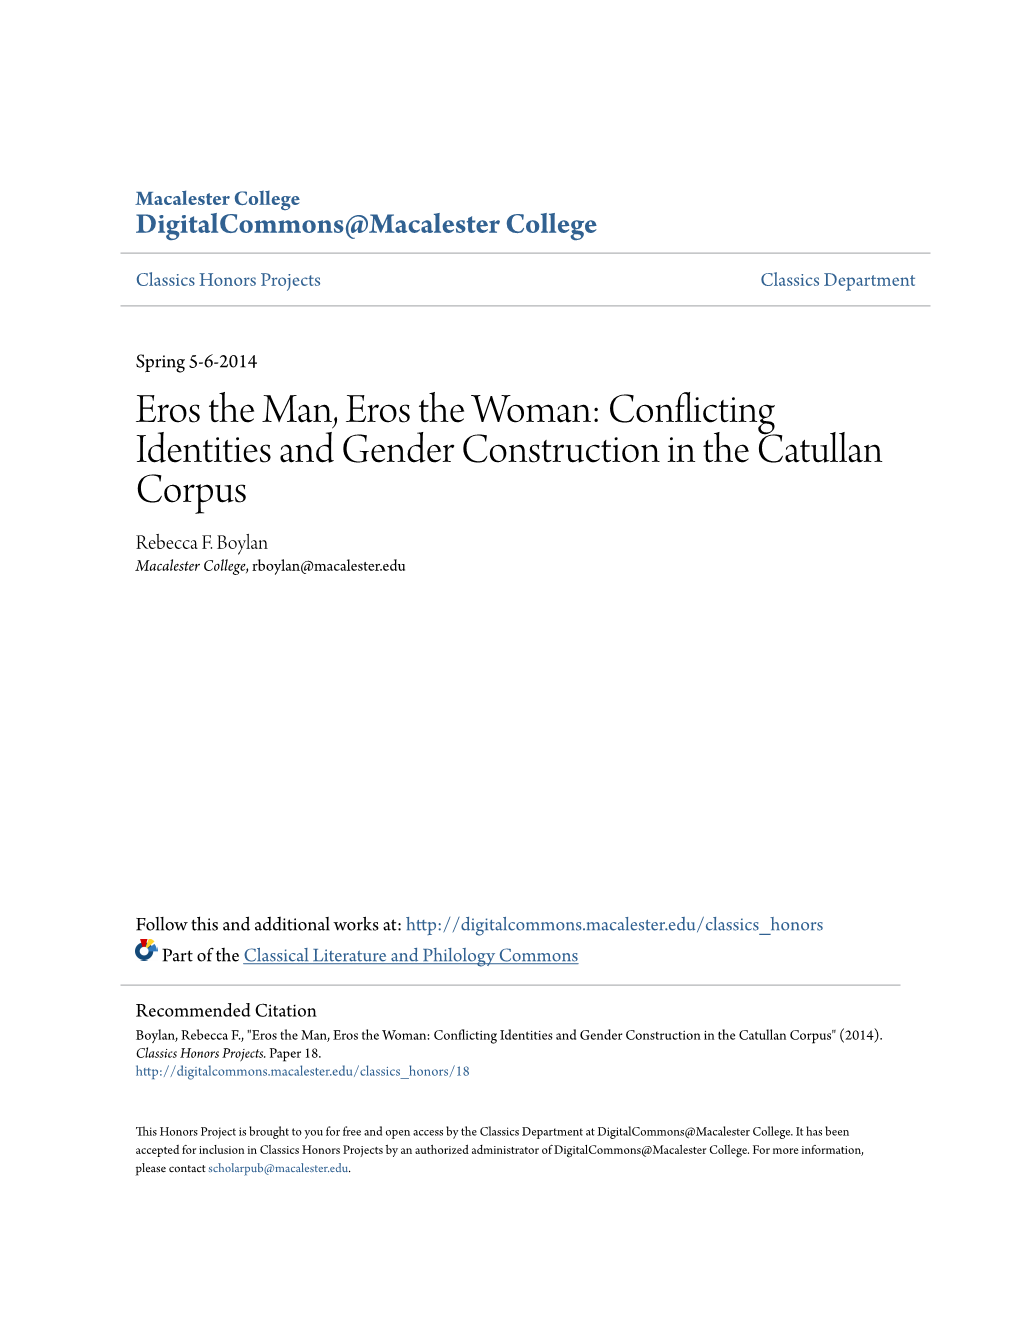 Conflicting Identities and Gender Construction in the Catullan Corpus Rebecca F